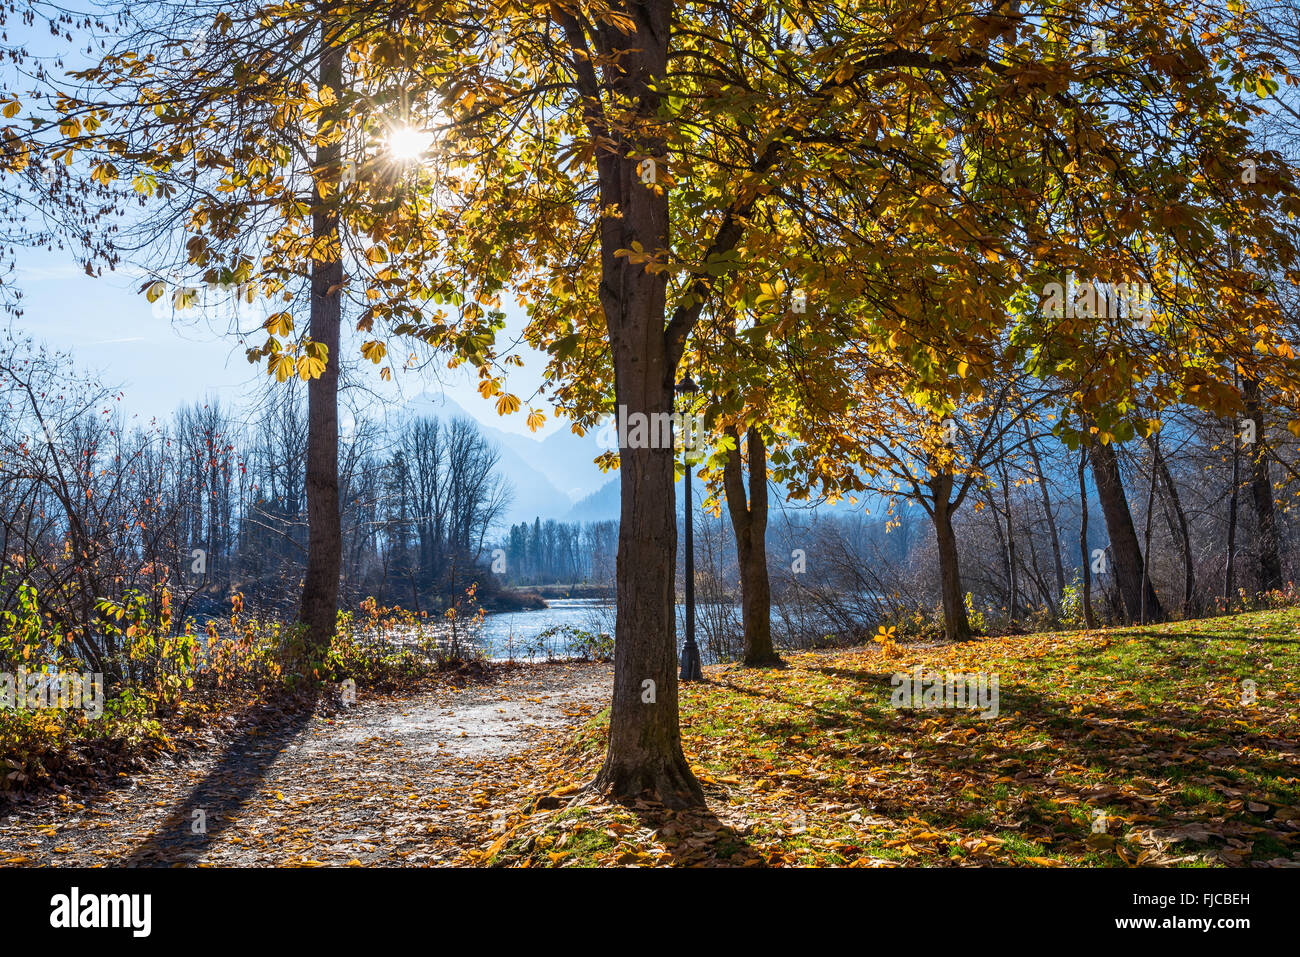 Fall foliage in Leavenworth Waterfront Park in Washington State. Stock Photo